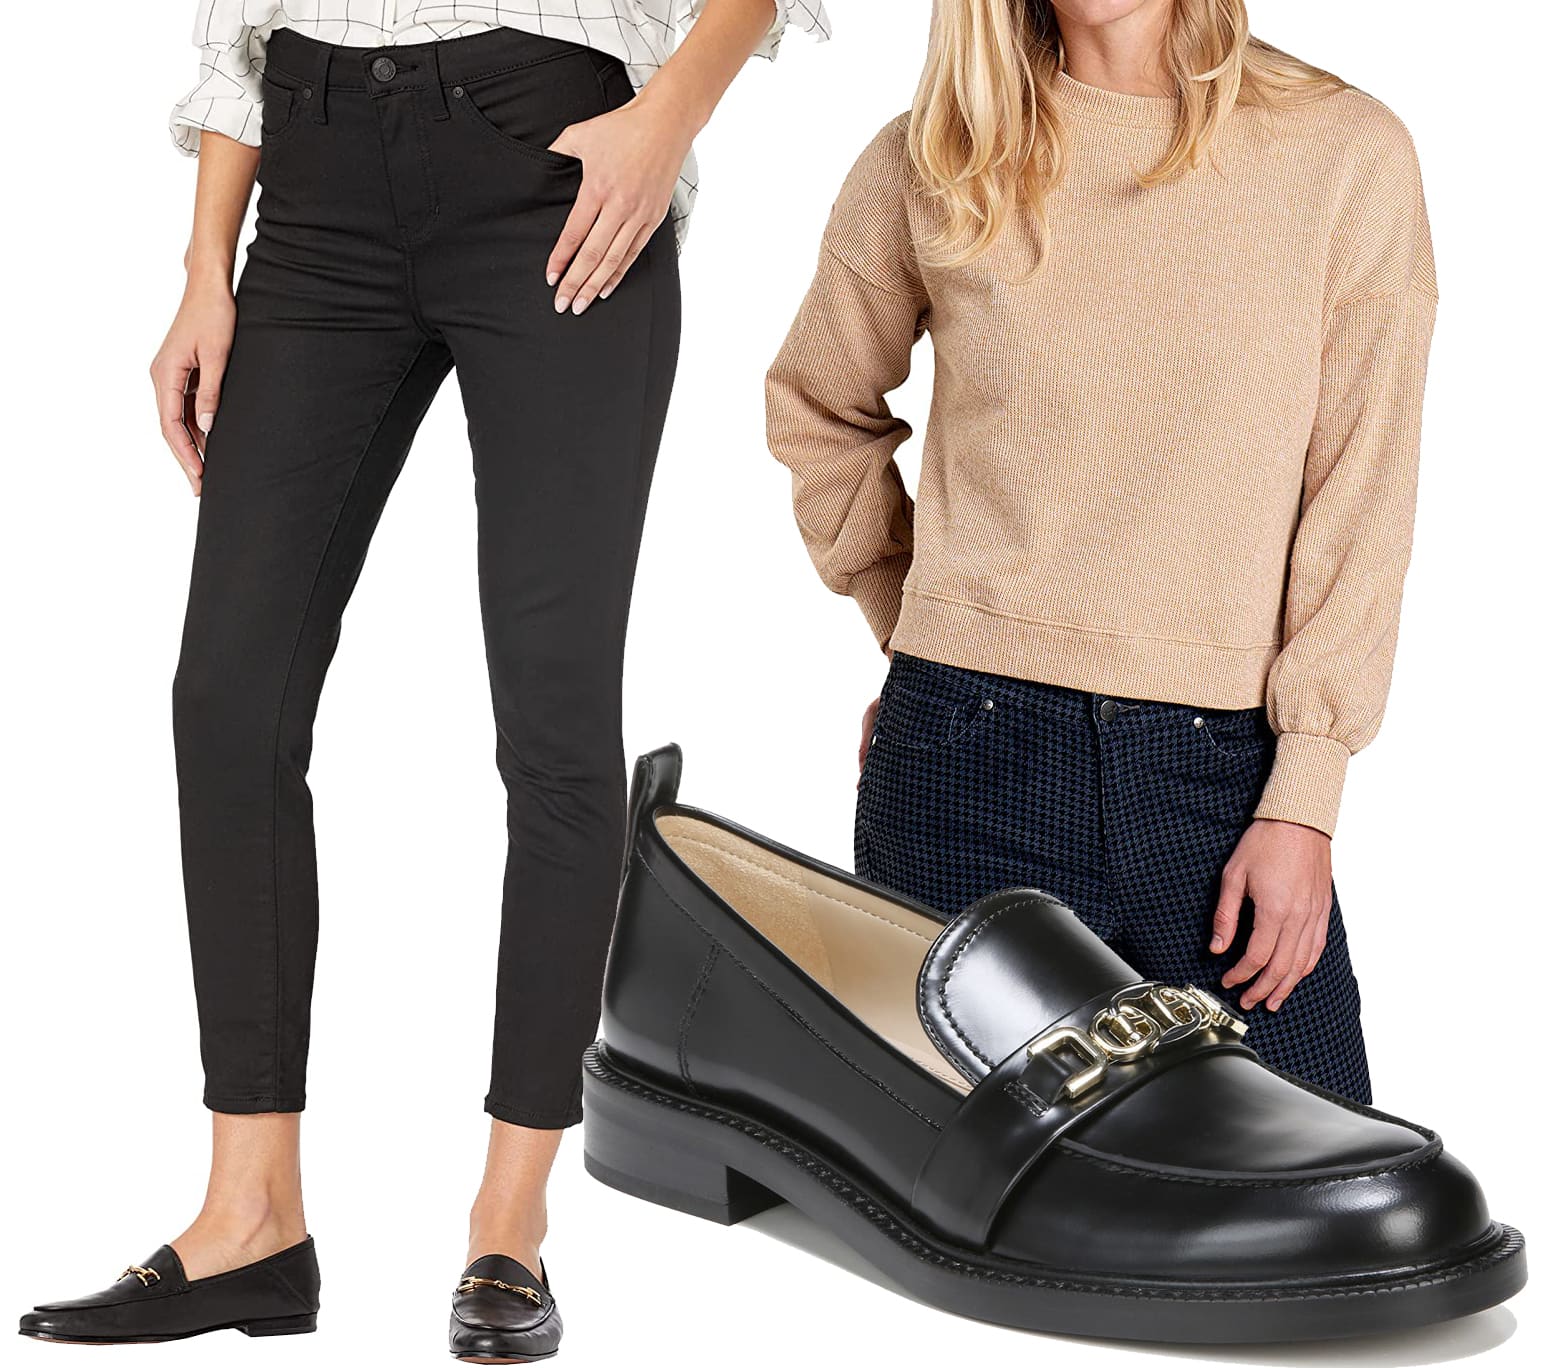 Jag Jeans Viola Pull-On High-Rise Skinny Jeans, $78.95 at Zappos, Sam Edelman Christy Loafers, $150 at Nordstrom, Toad&Co Byrne Pullover, $75 at Zappos